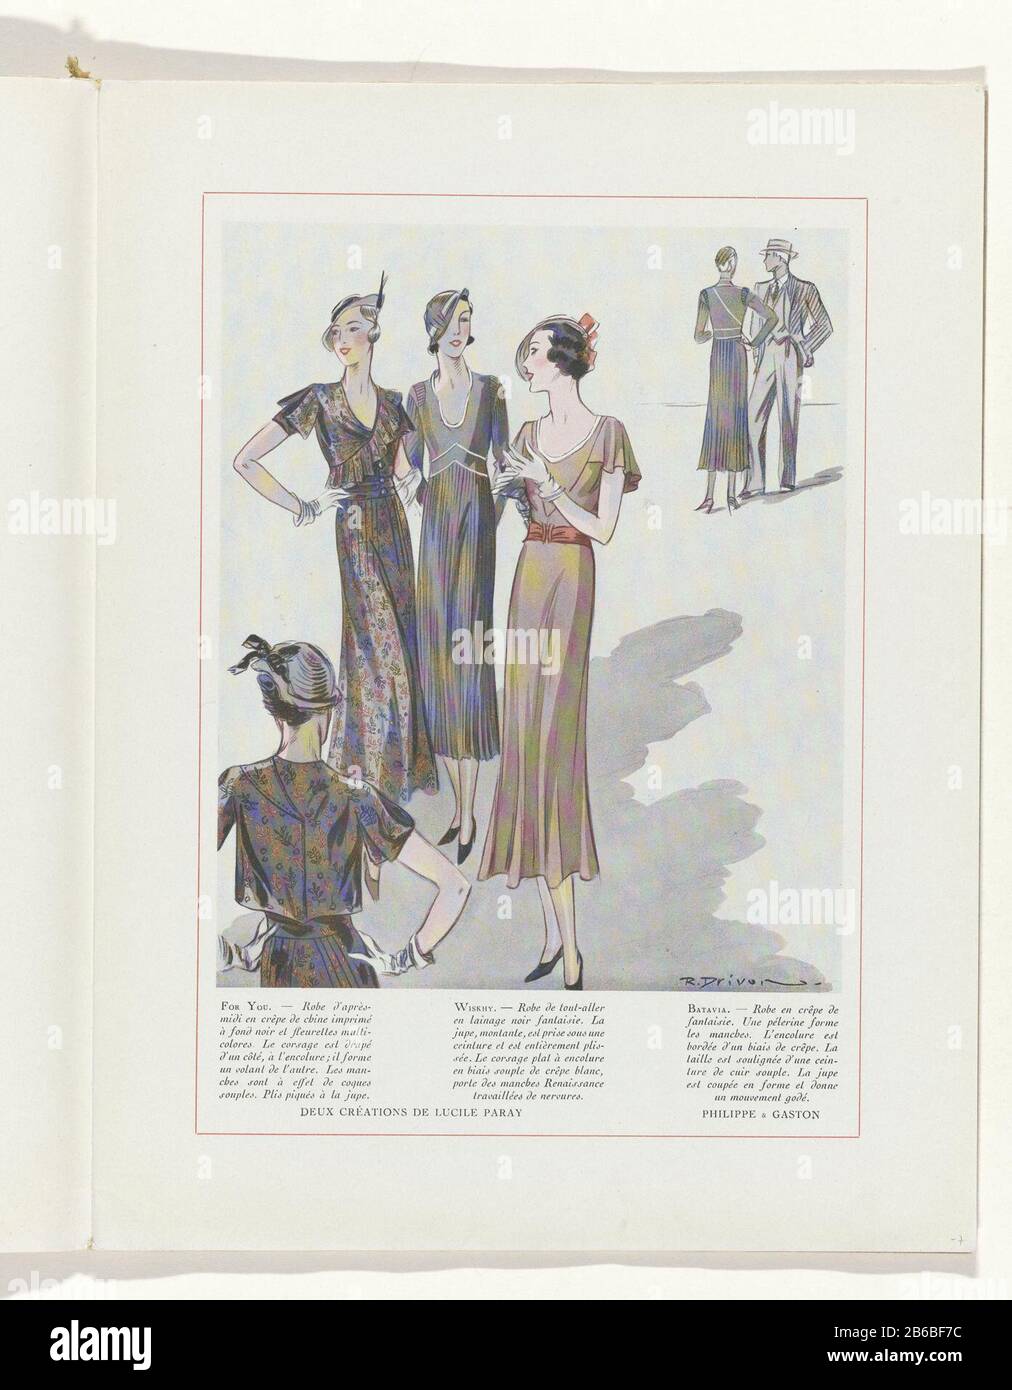 Creations Lucille Paray and Philippe et Gaston. Page of the fashion  magazine Art-Gout-Beauté (1920-1933) . Manufacturer : design by R. DRIVON  (listed building) fashion designer Lucile Paray (listed building) fashion  house Philippe